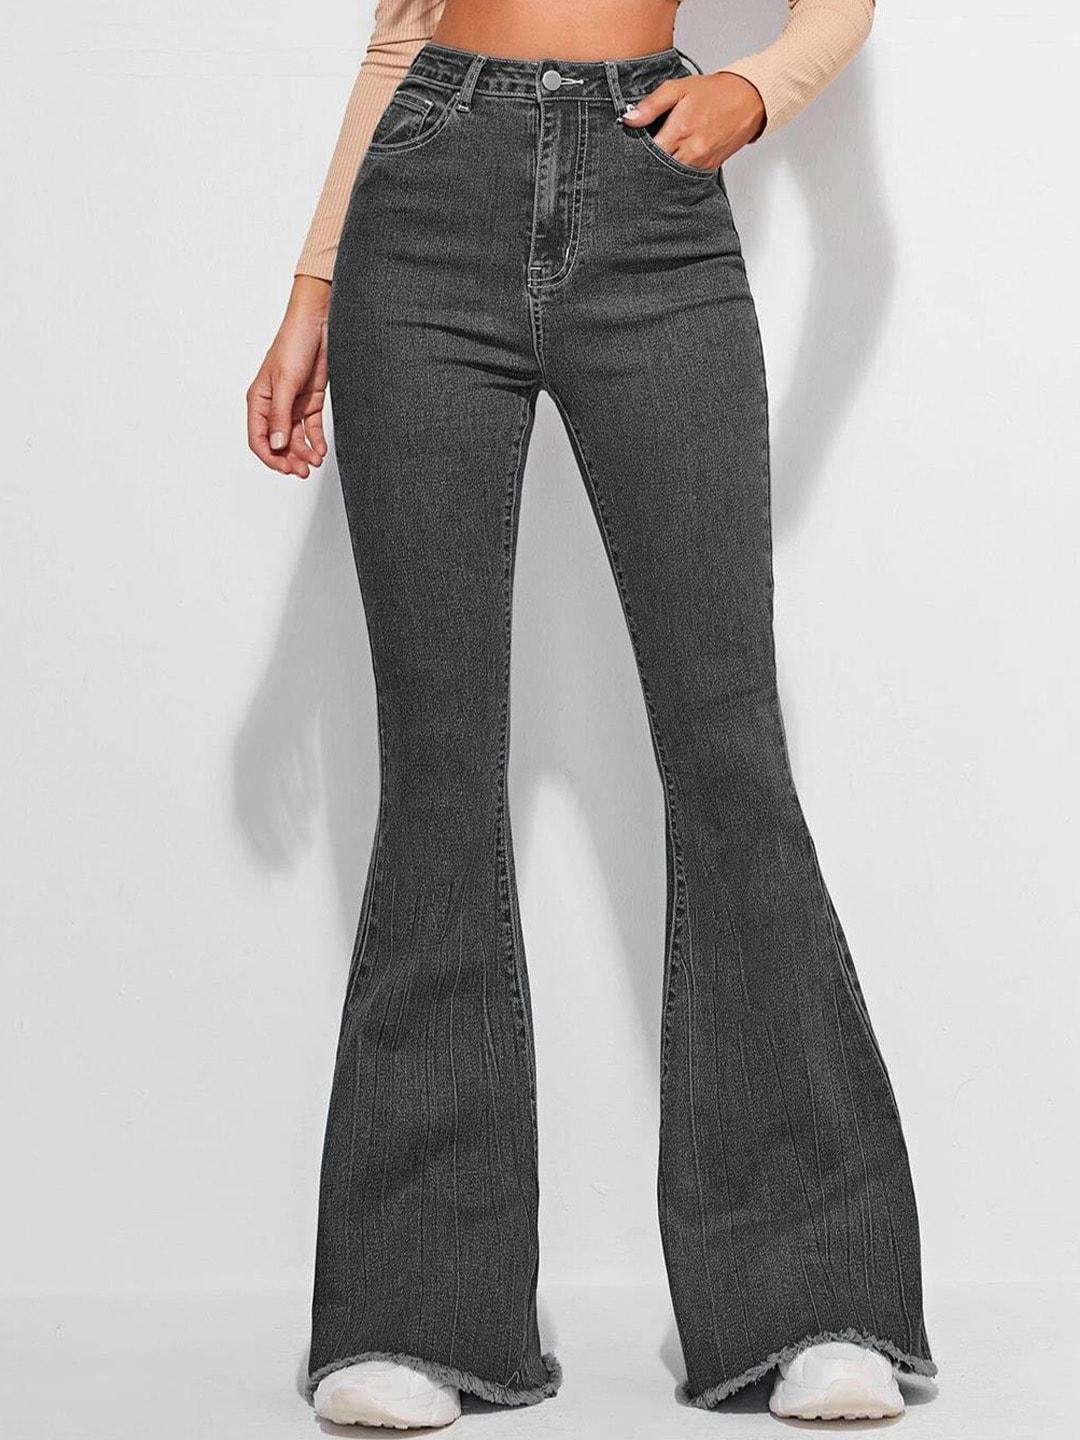 kotty-women-high-rise-jean-bootcut-clean-look-stretchable-jeans